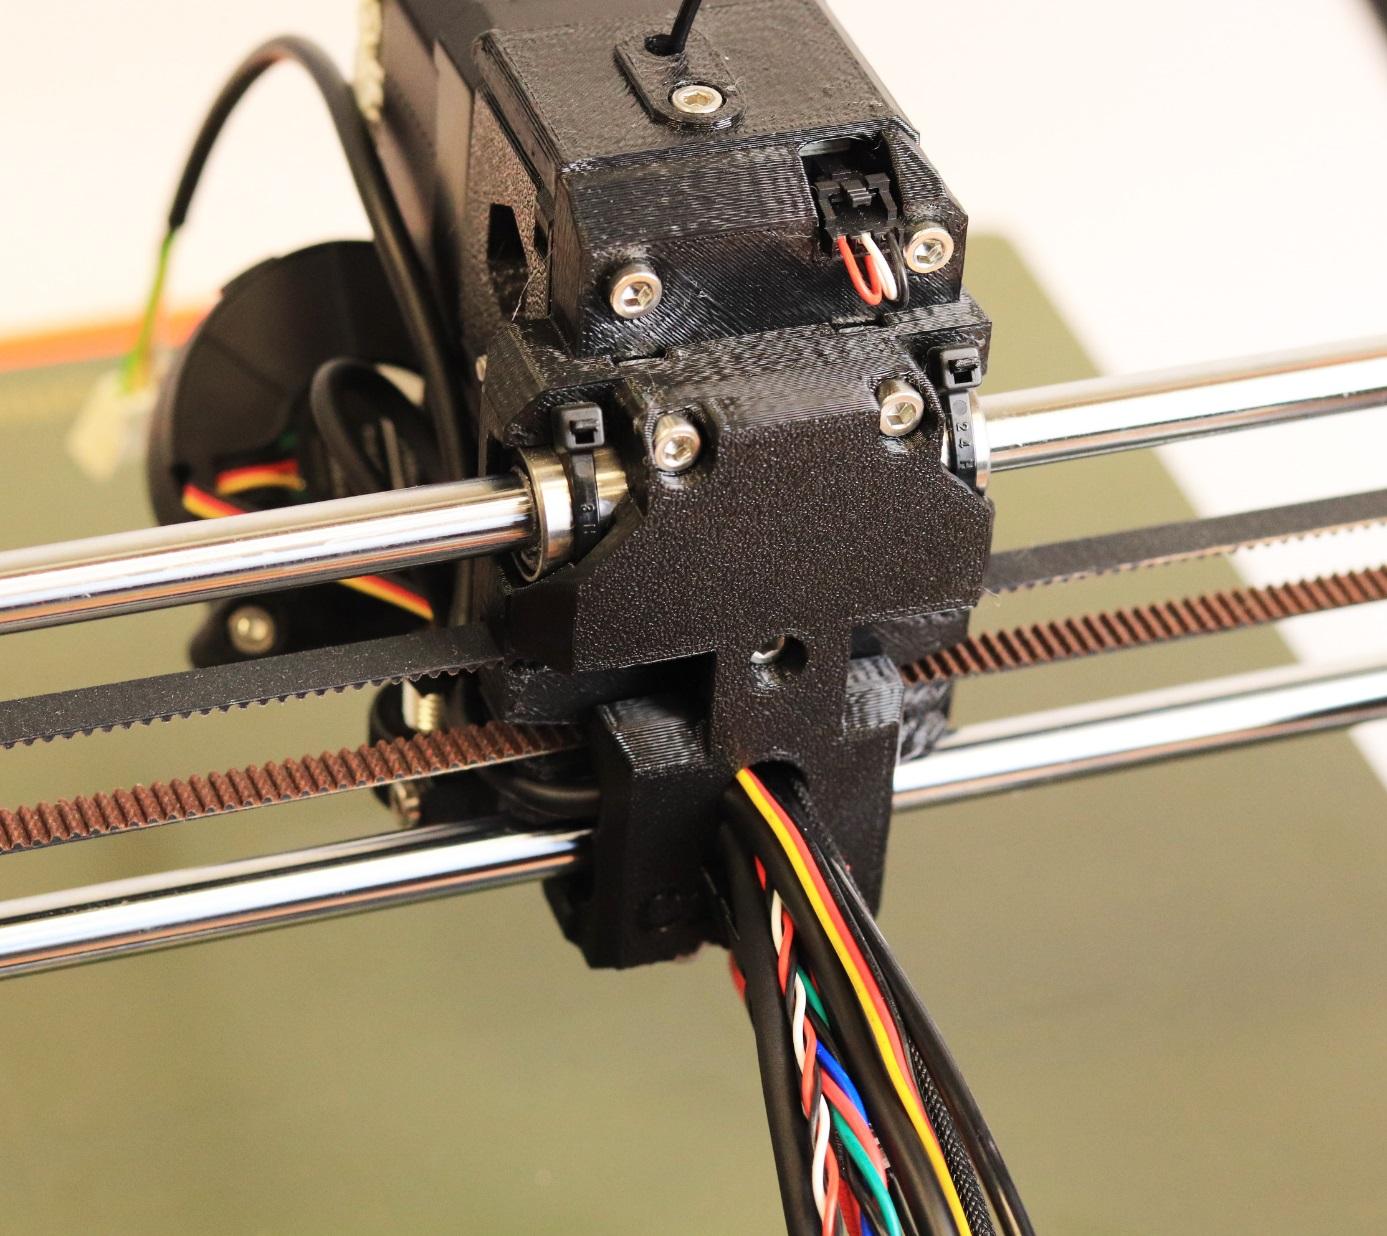 Setting up X-Carriage at Prusa 3DP